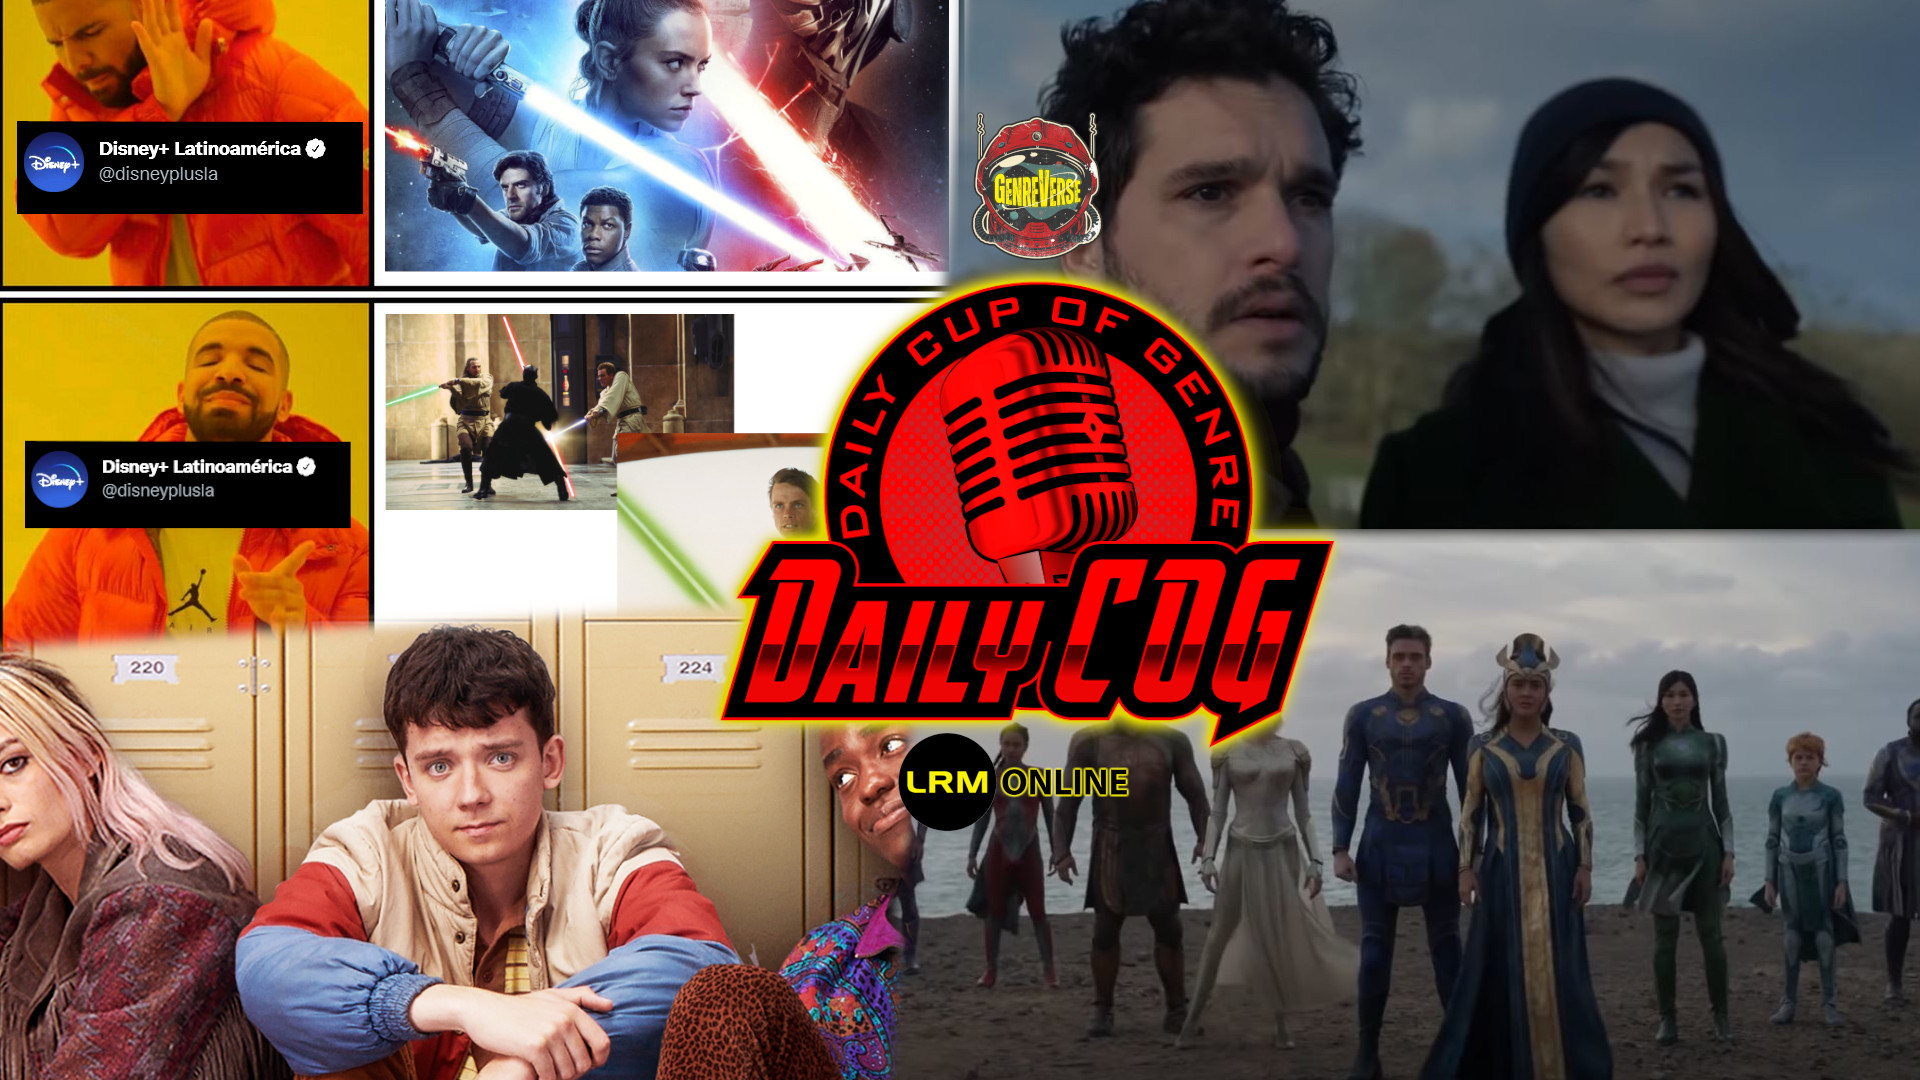 Sex Education (Series) Is Cool, An Official Disney Plus (@disnyplusla) Tweet On The Star Wars Sequel Trilogy Sparks An Old Debate, Black Knight’s Role In The Eternals | Daily COG